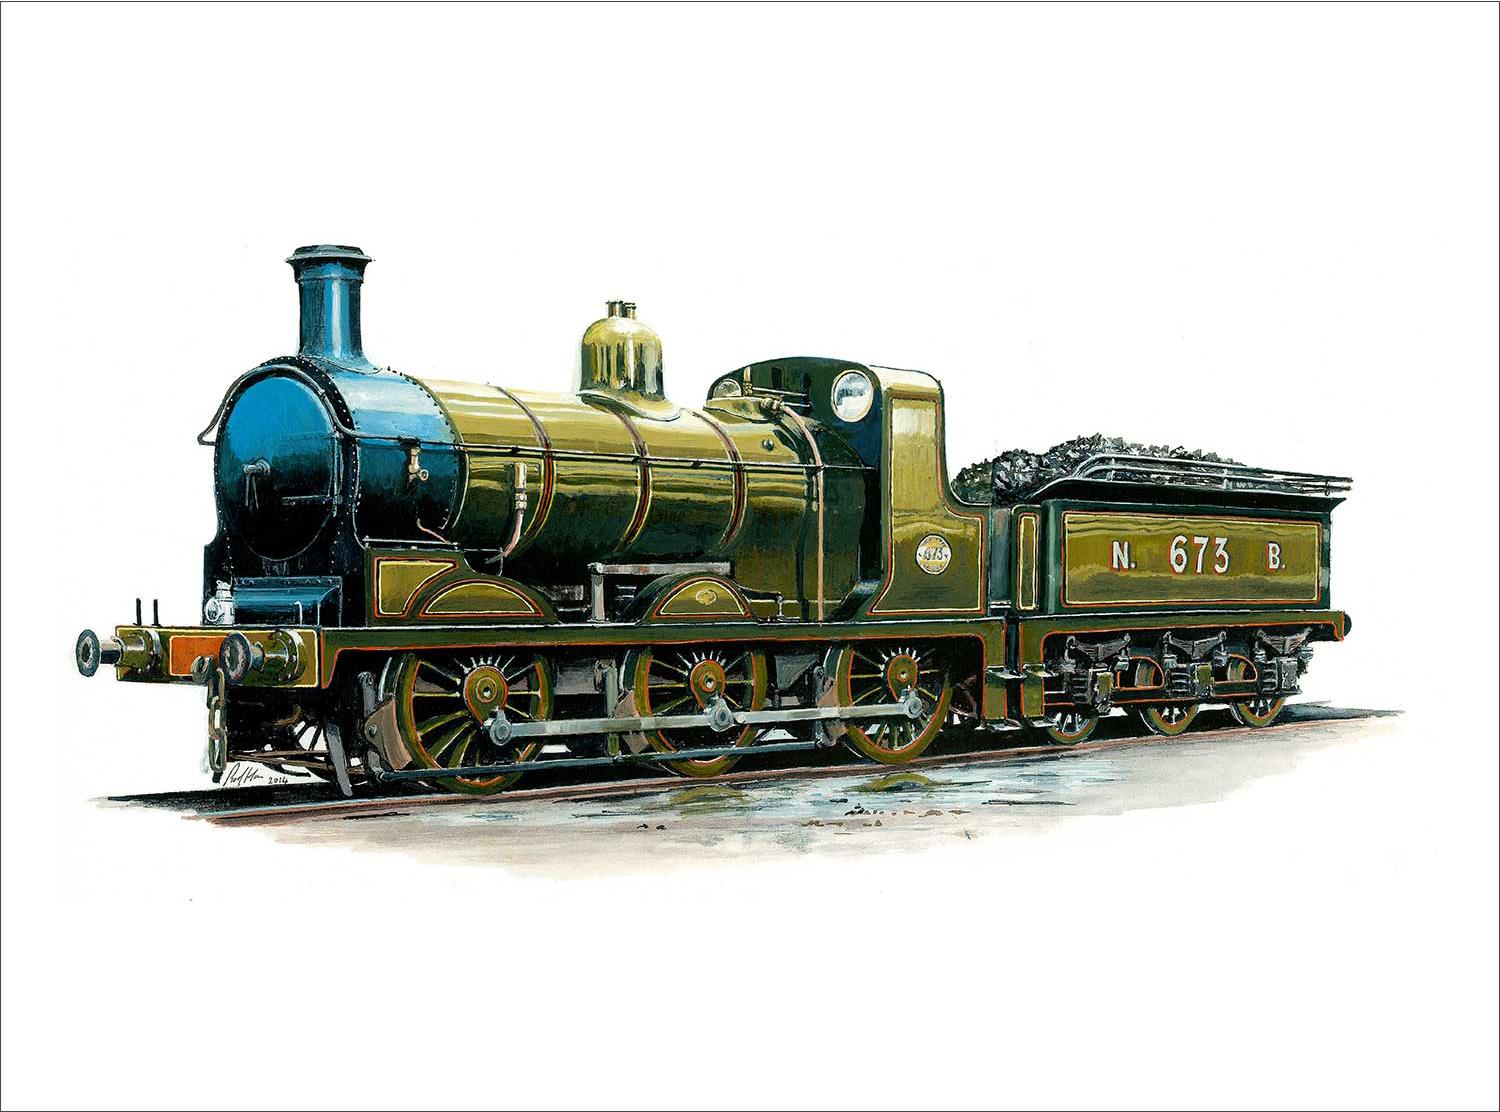 North British Railway No 673 “Maude” As Built 1891 by Neilsons & Co Glasgow Art Print from an original painted by artist Rod Harrison